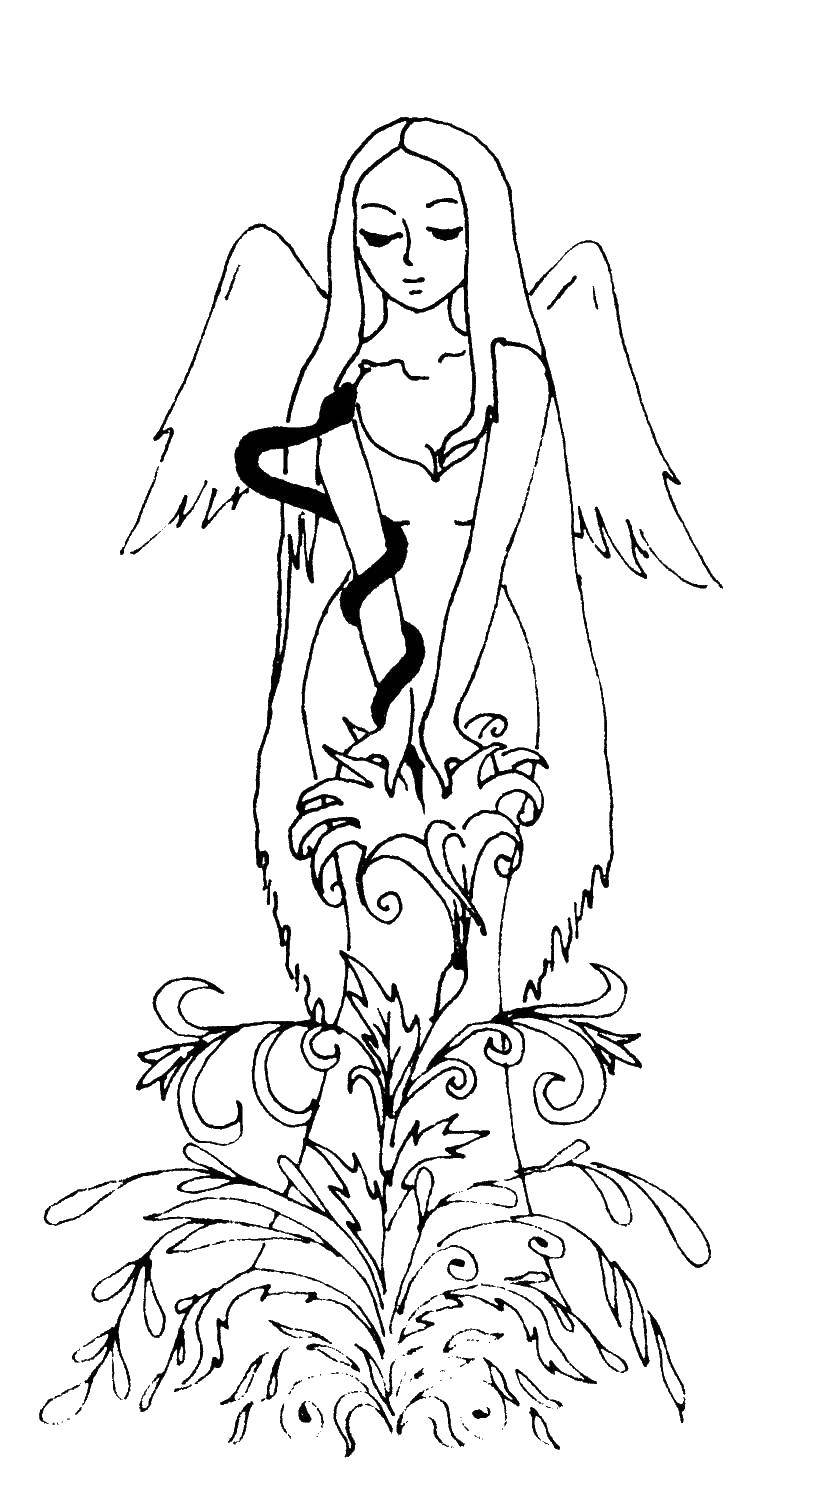 Coloring The angel and the snake. Category angels. Tags:  angel .